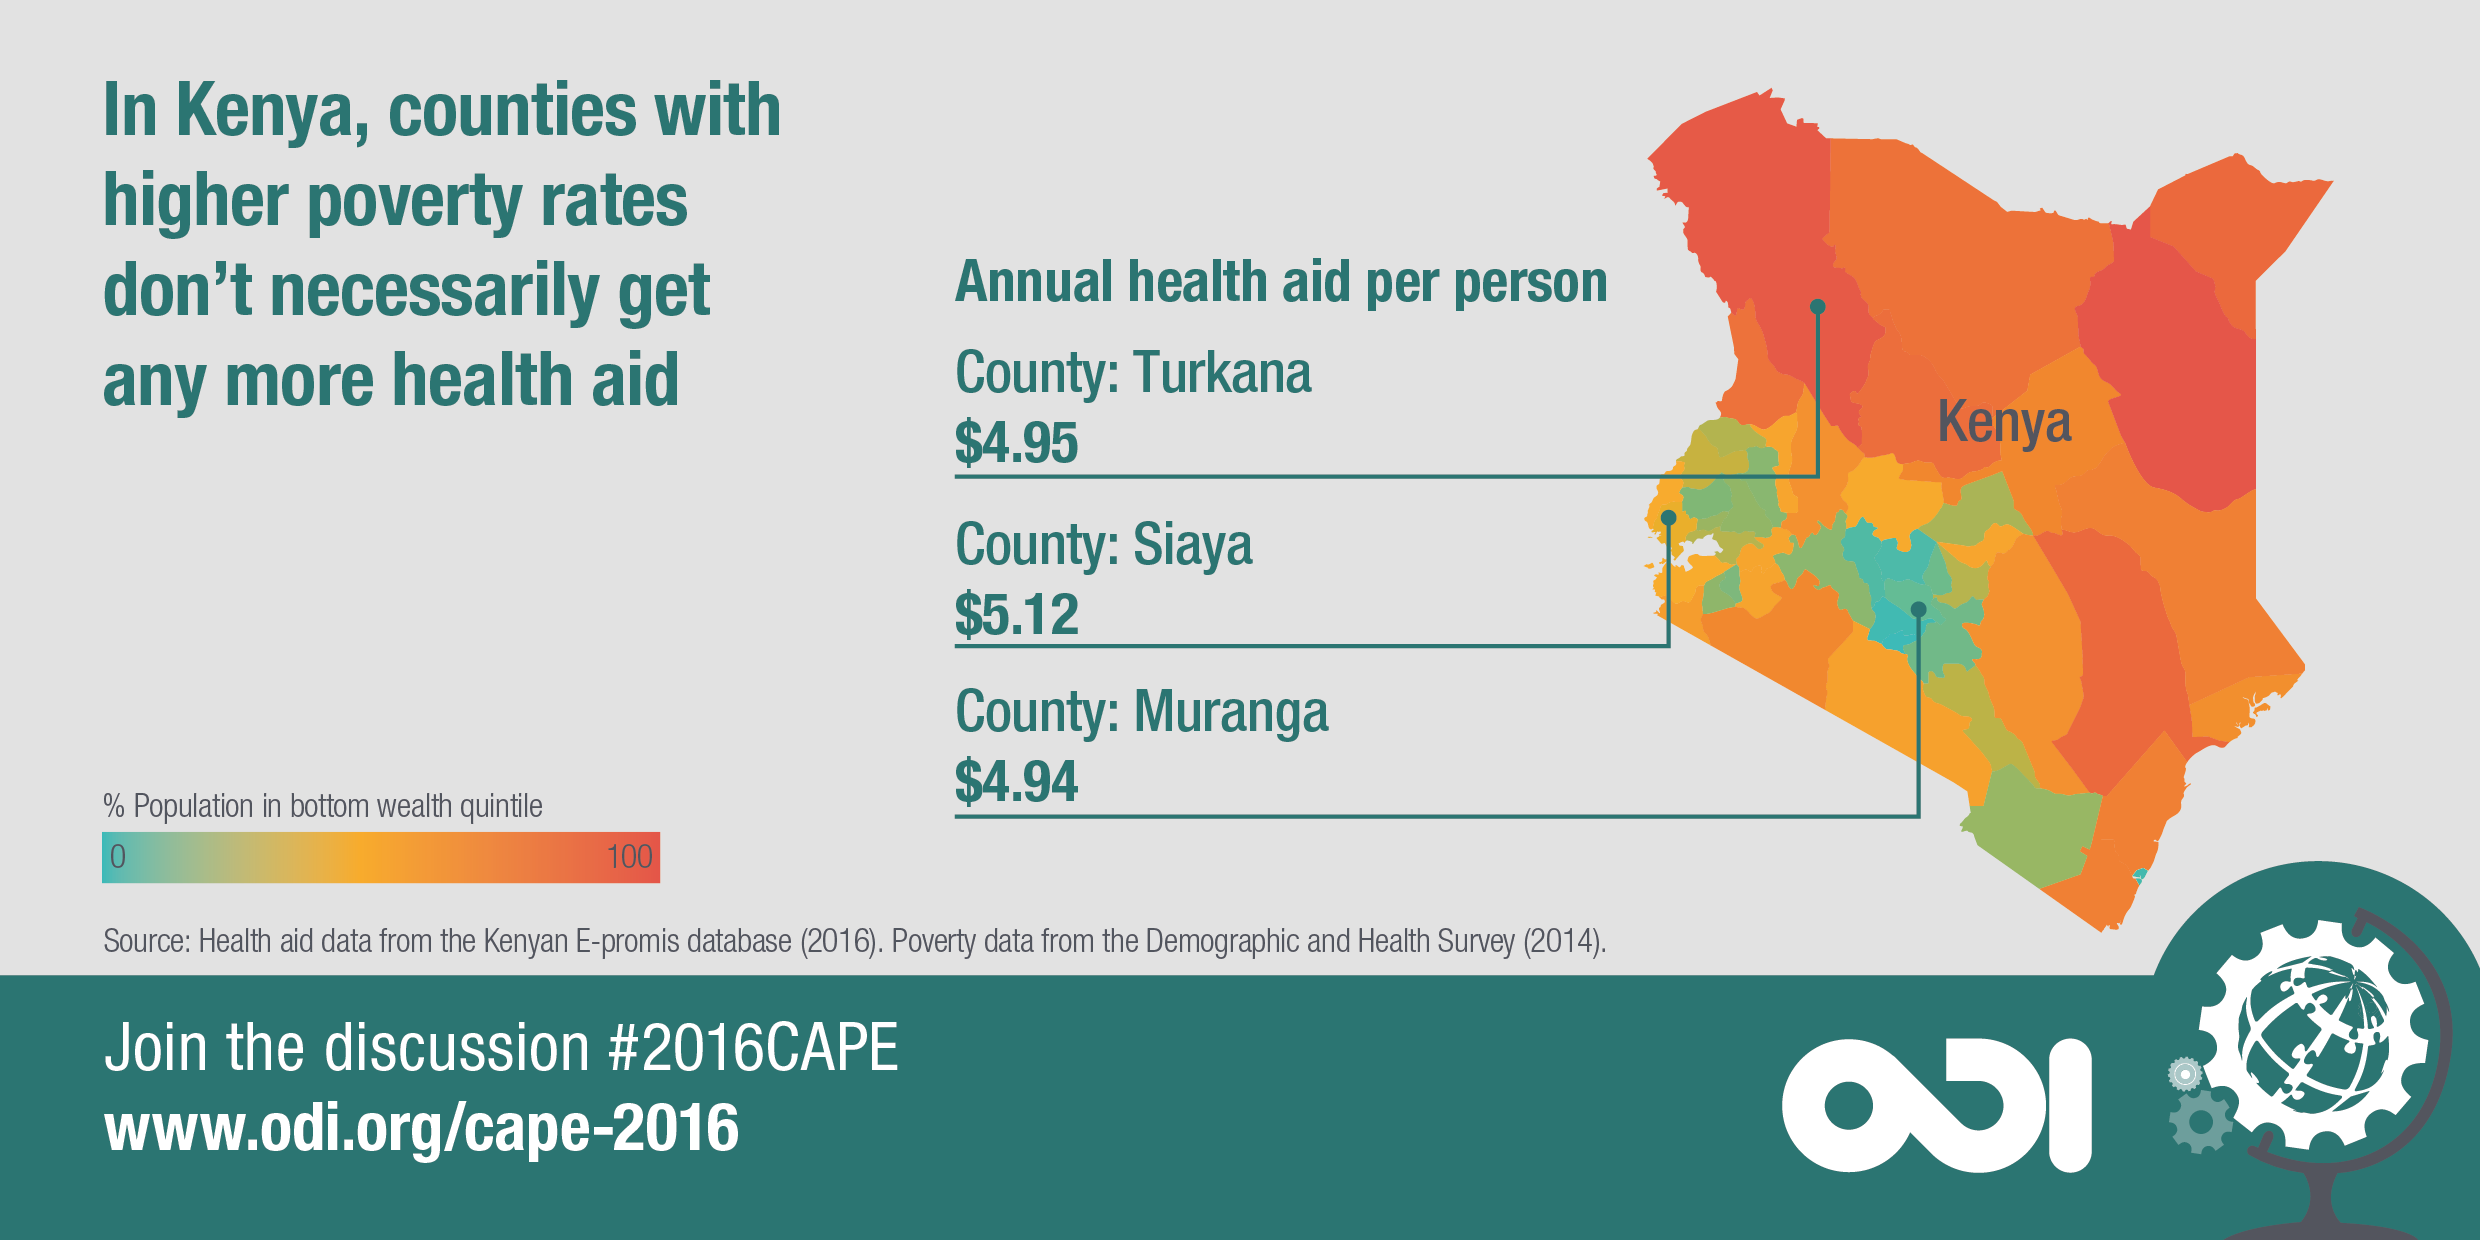 In Kenya, counties with higher poverty rates don't necessarily get more health aid.